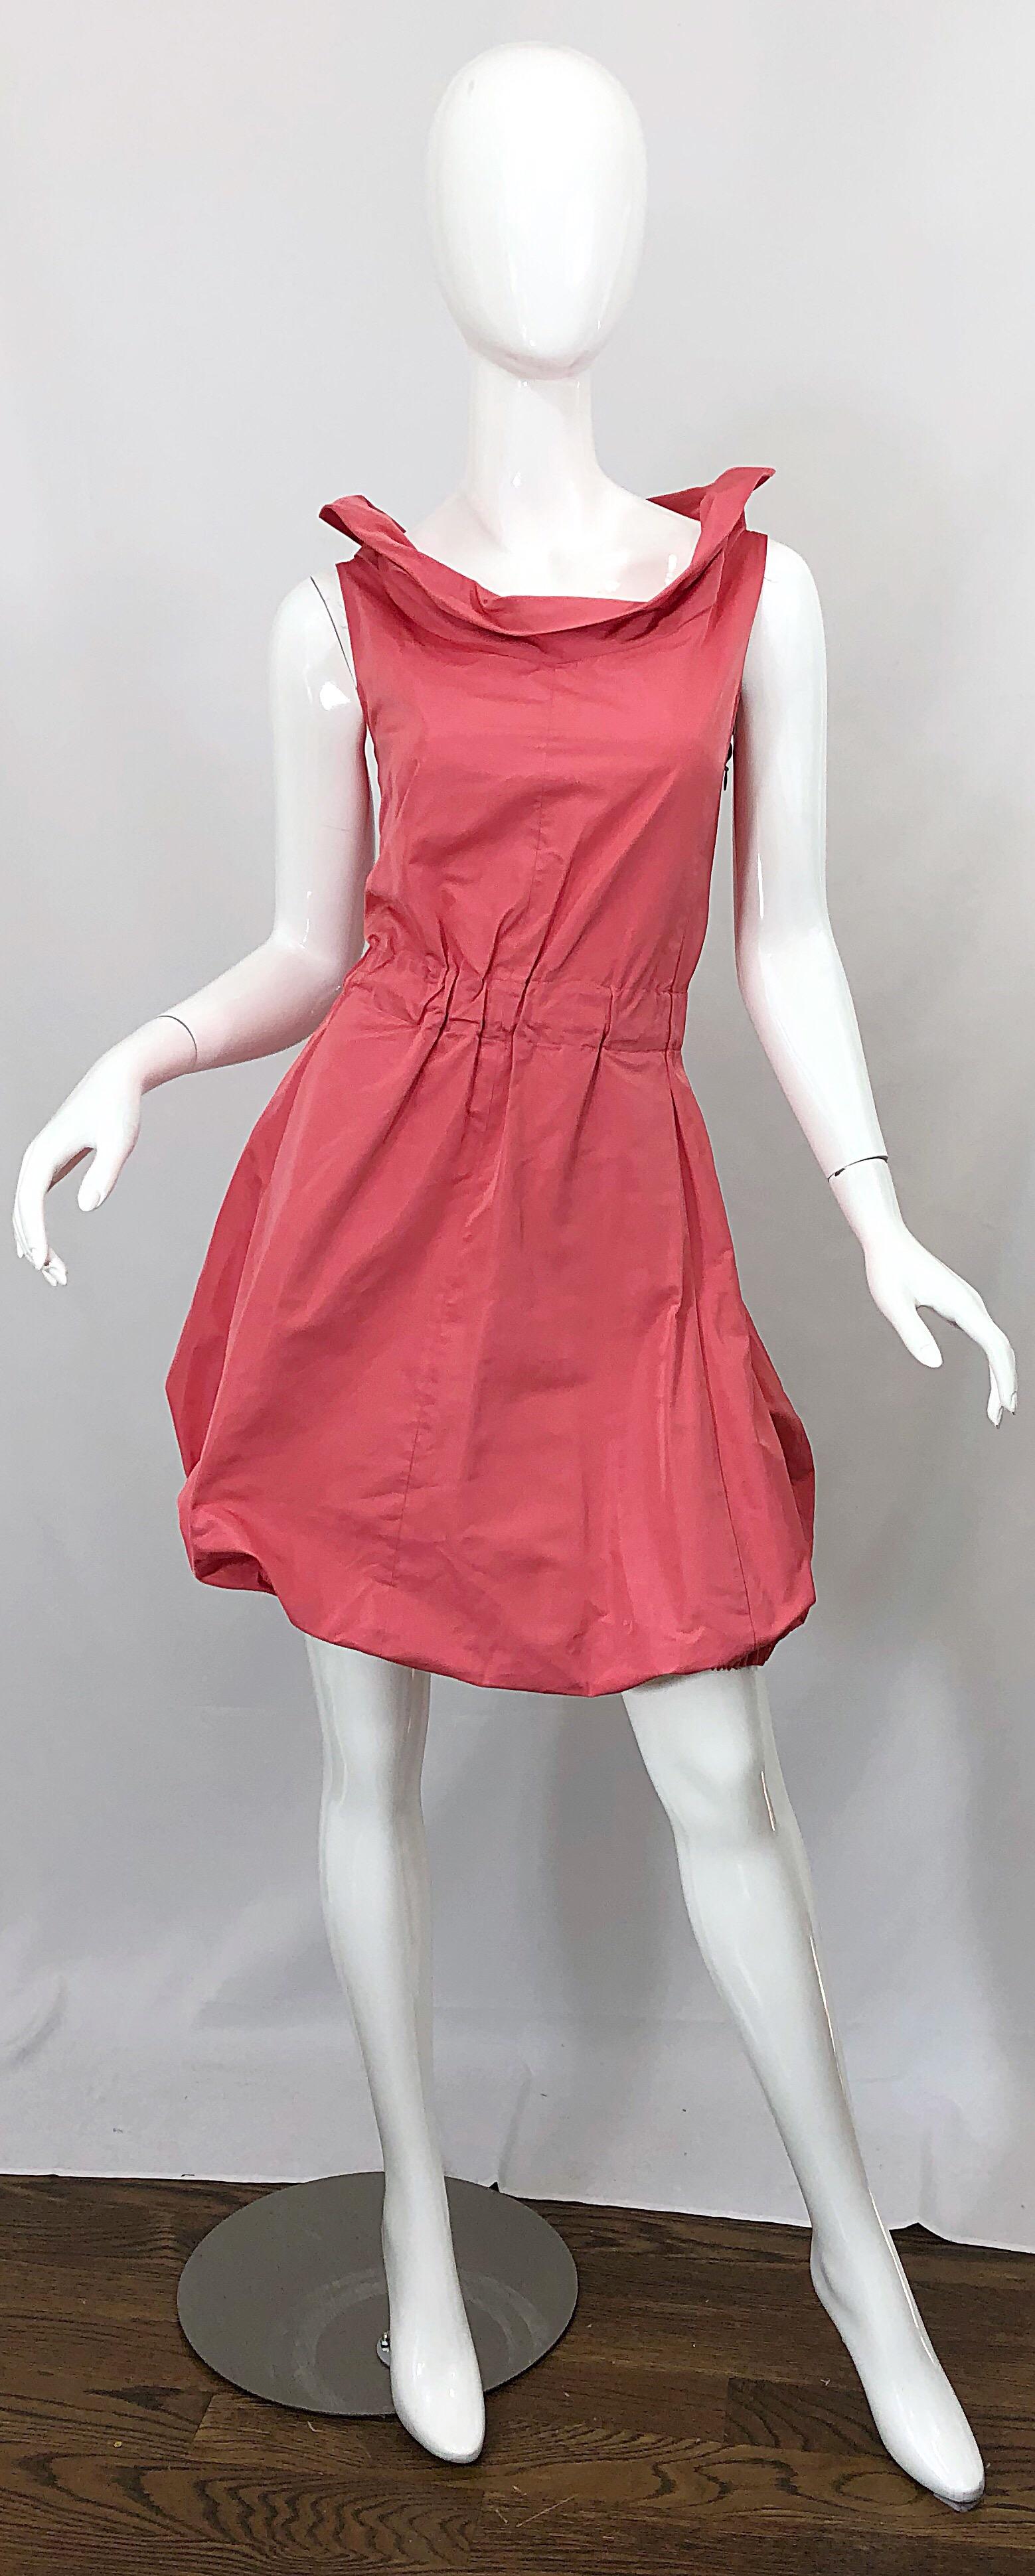 Avant Garde vintage NINA RICCI early 2000s exclusively for Saks 5th Avenue coral / pink silk blend. Flattering cowl neck with a fitted bodice. Forgiving full bubble skirt. Hidden zipper up the side with hook-and-eye closure. Elastic waistband. Great